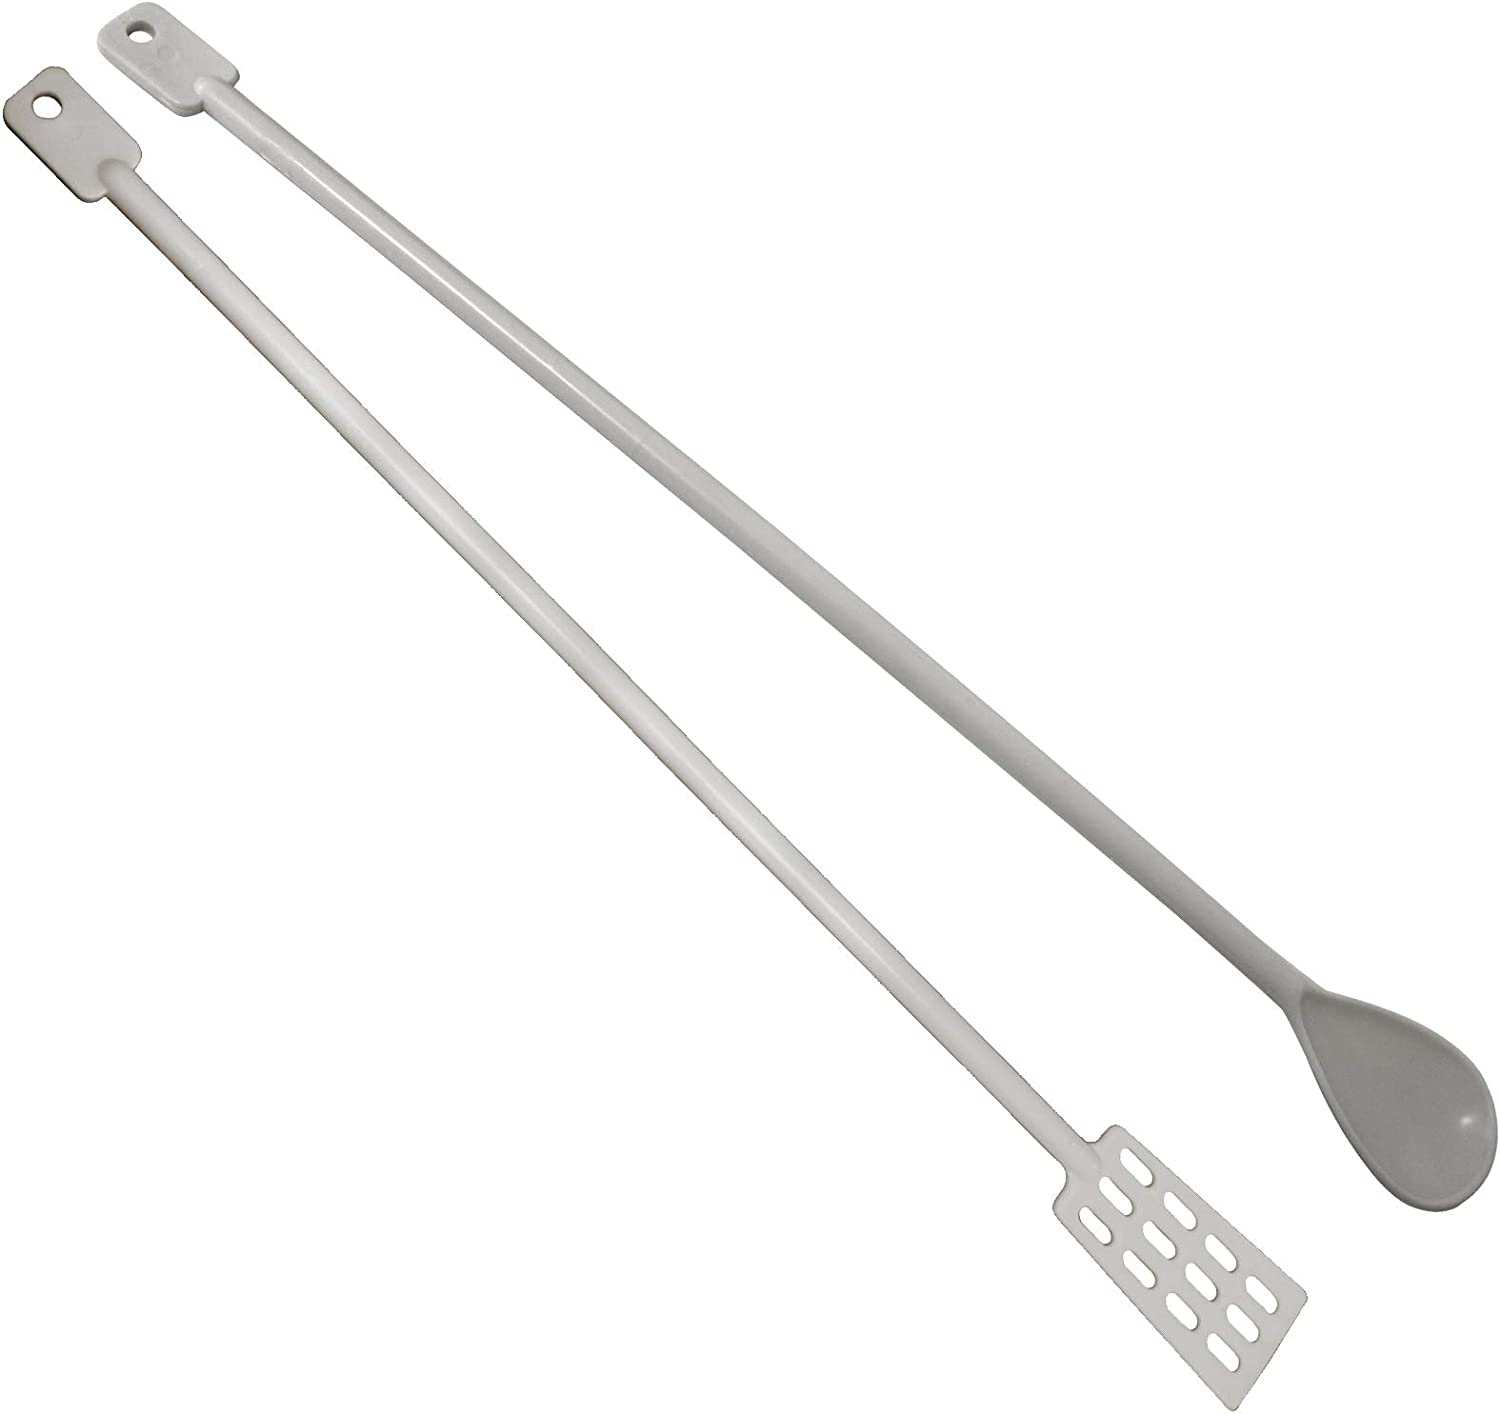 https://barobjects.com/wp-content/uploads/2022/10/Barobject-Brewing-SPoon.jpg